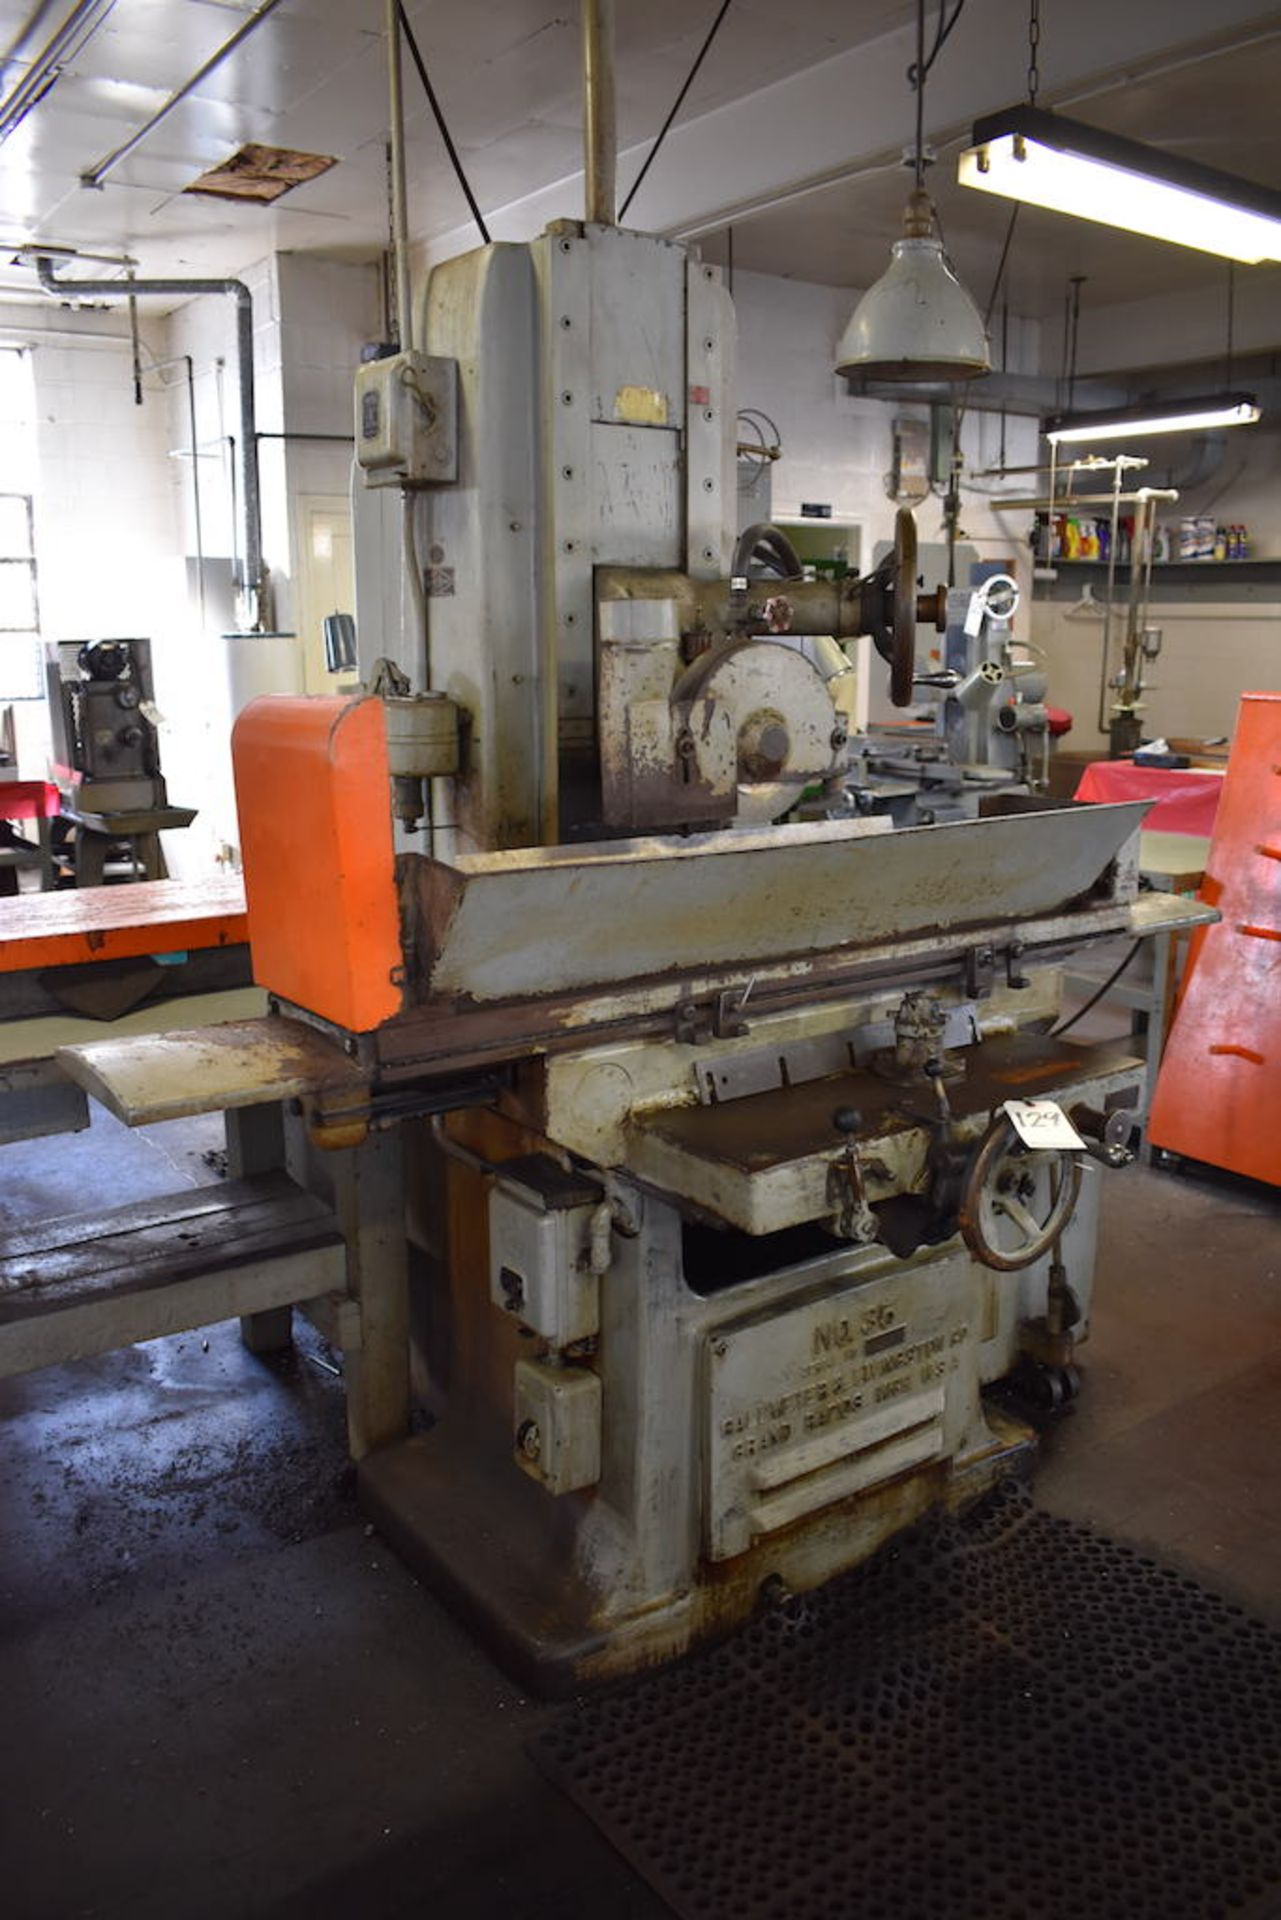 Gallmeyer & Livingston Grand Rapids No. 35 8 in. x 24 in. Hydraulic Surface Grinder, S/N S-35582- - Image 2 of 6